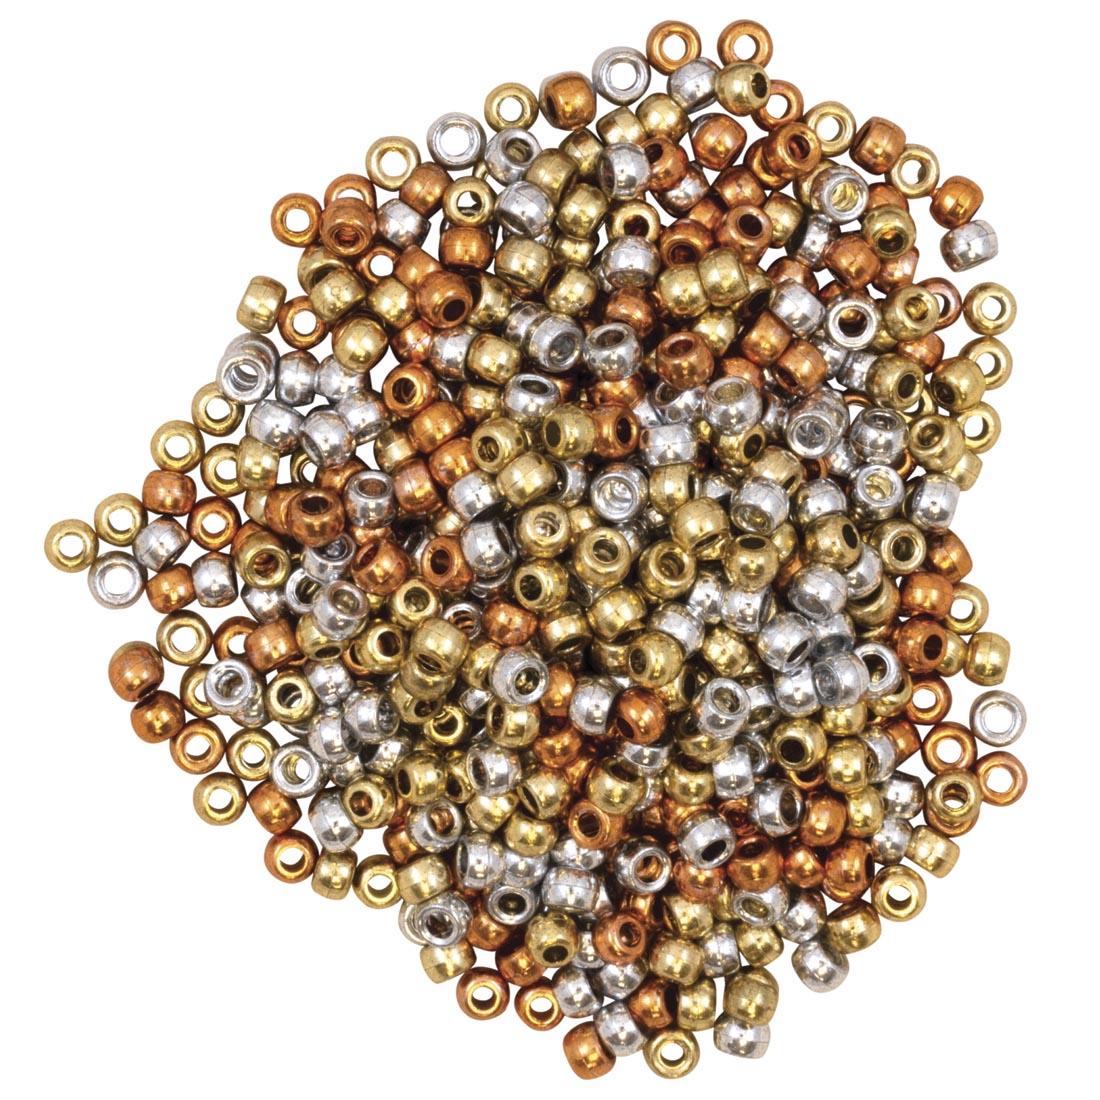 Creativity Street plastic Pony Beads in metallic gold, silver and copper colors